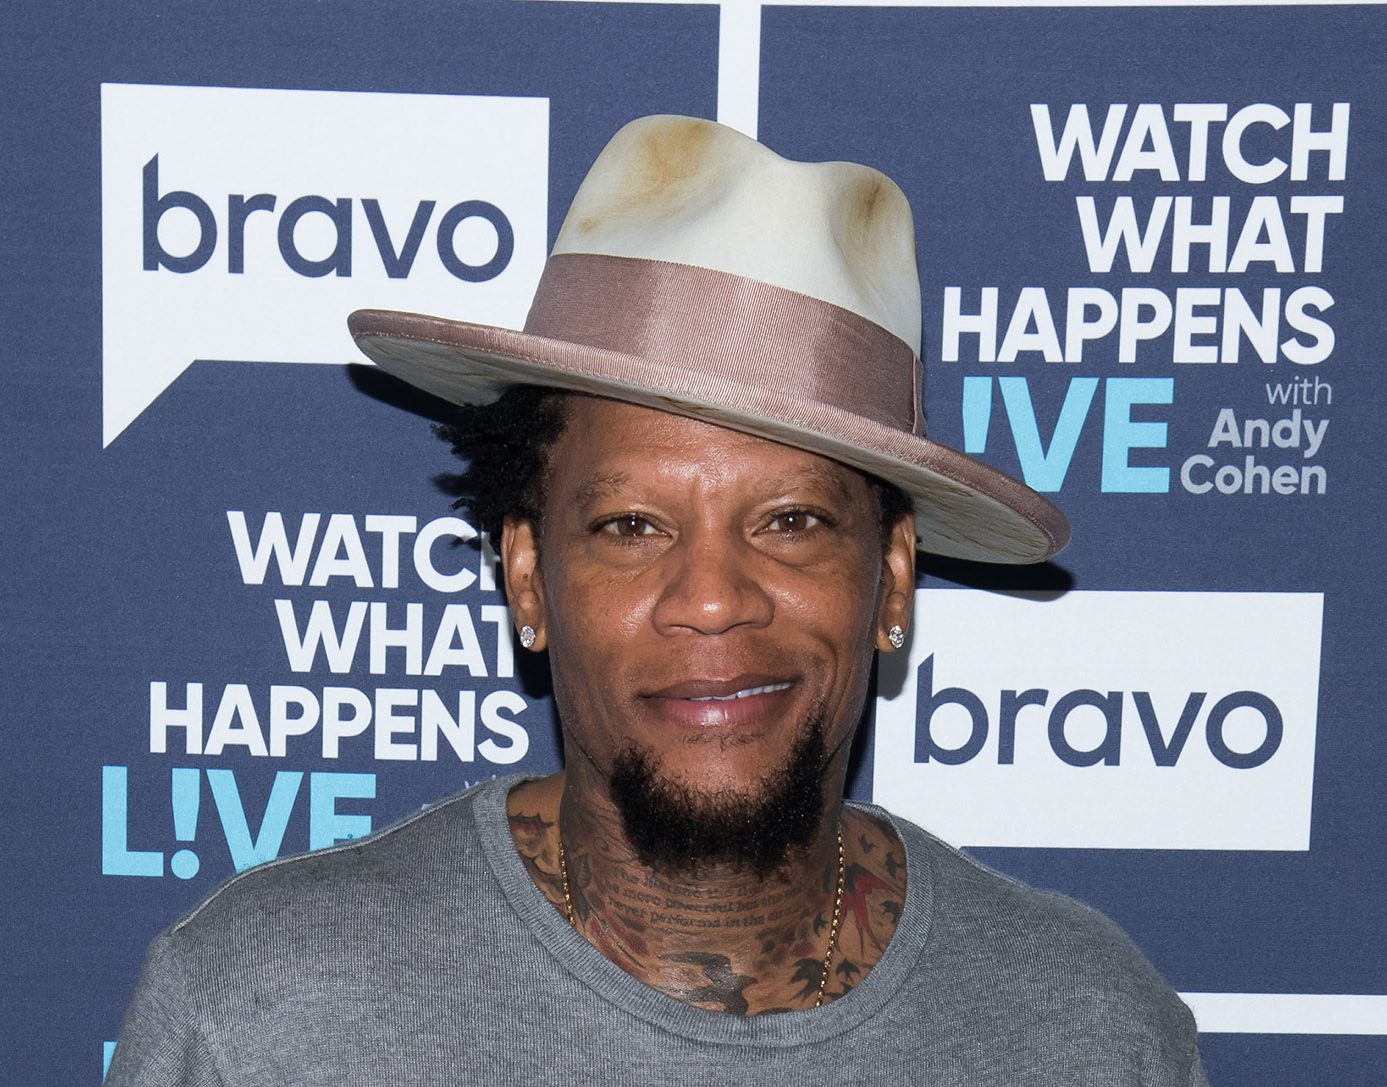 DL Hughley  Beyond tragic Story Below  Mental health and  depression are REAL One thing I can say is that we have definitely made  some positive changes in having these types